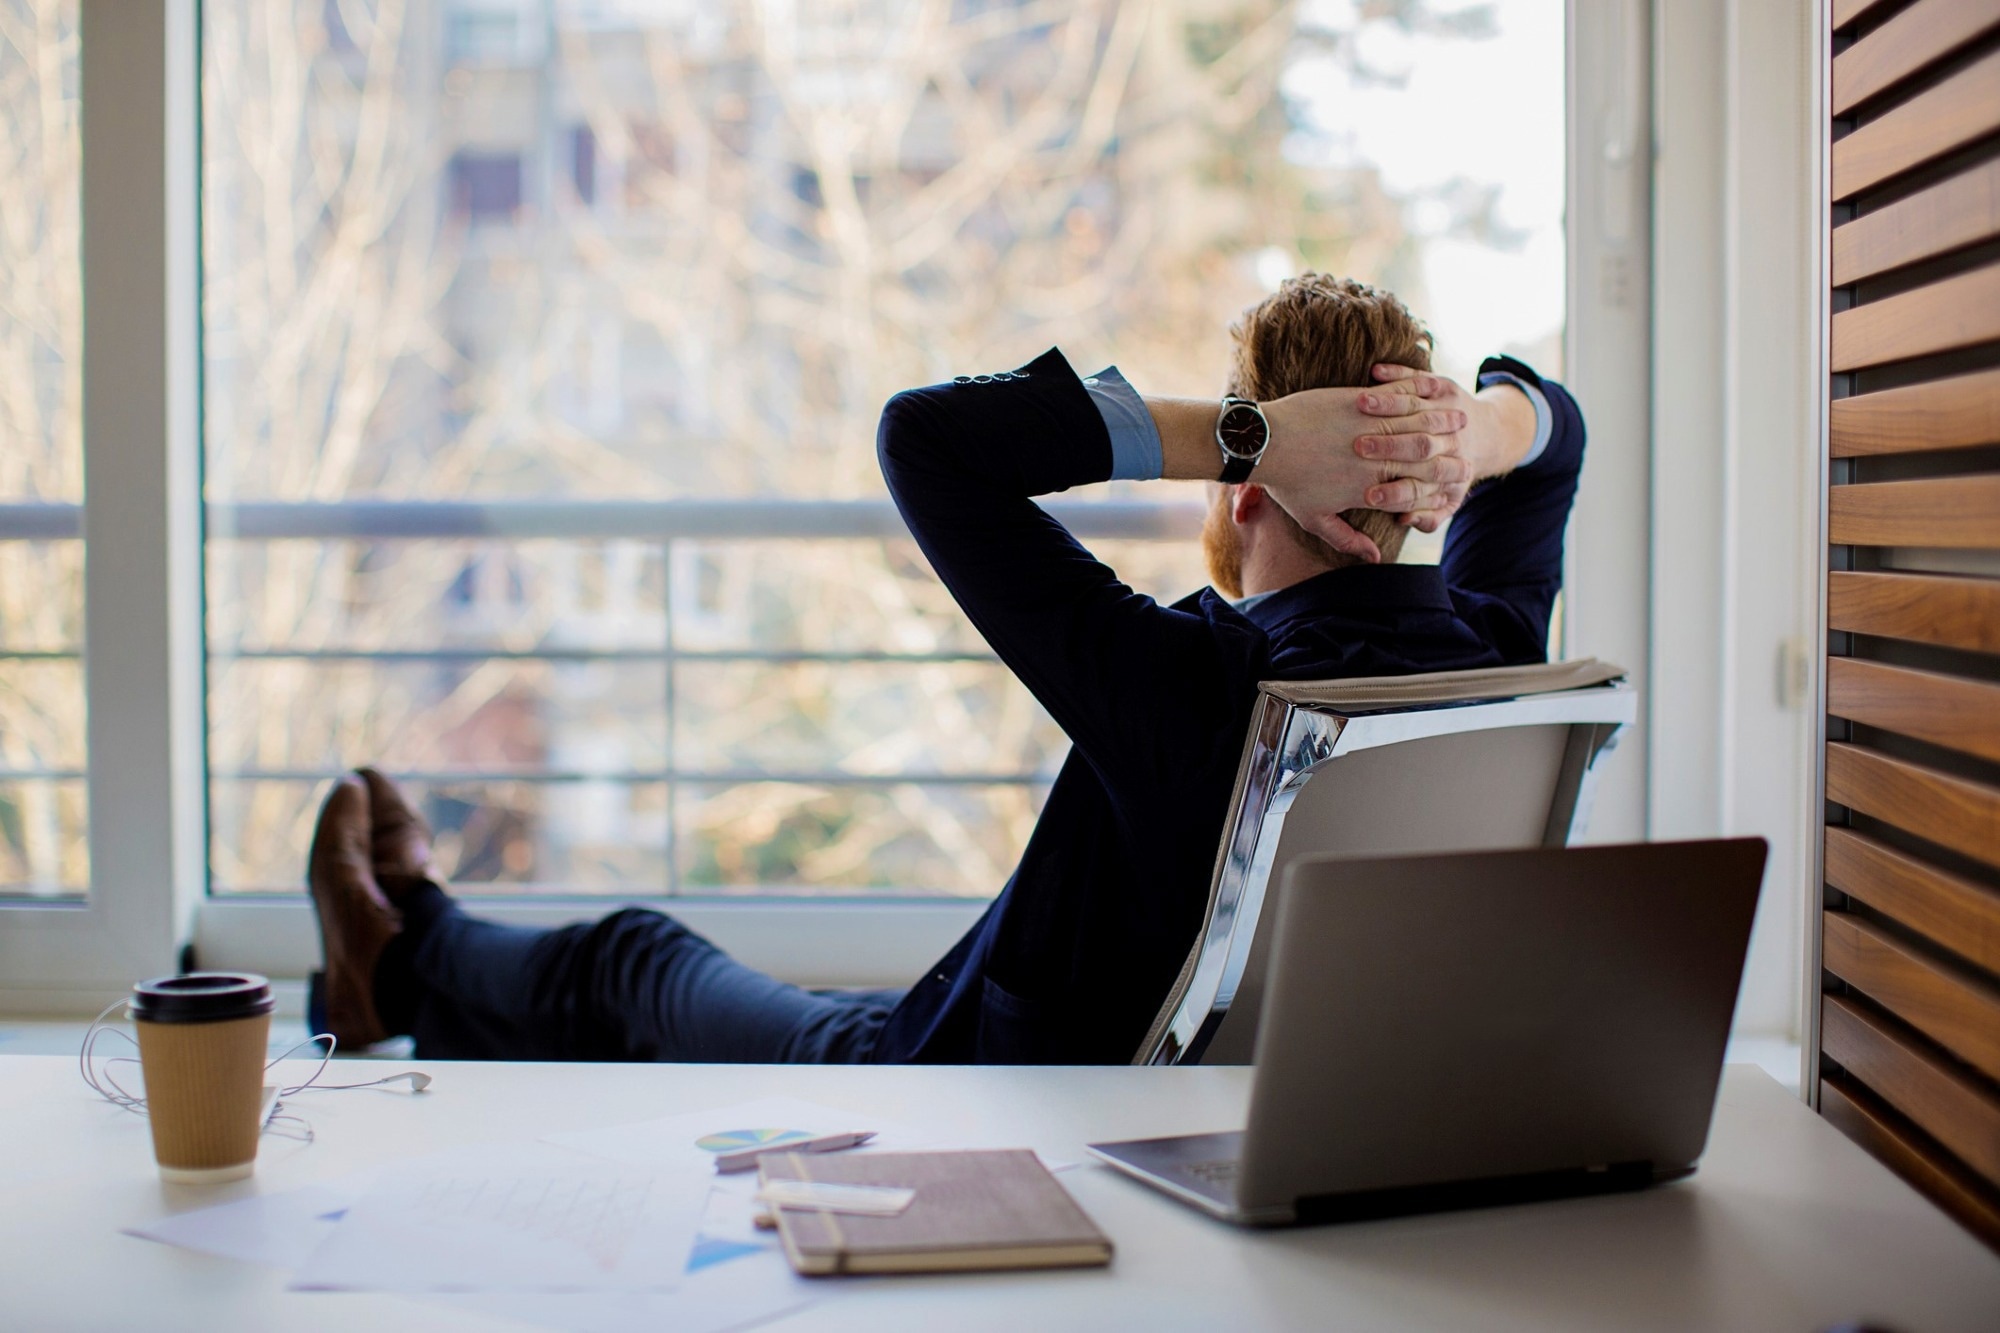 Heavy workloads may discourage employees from taking breaks at work